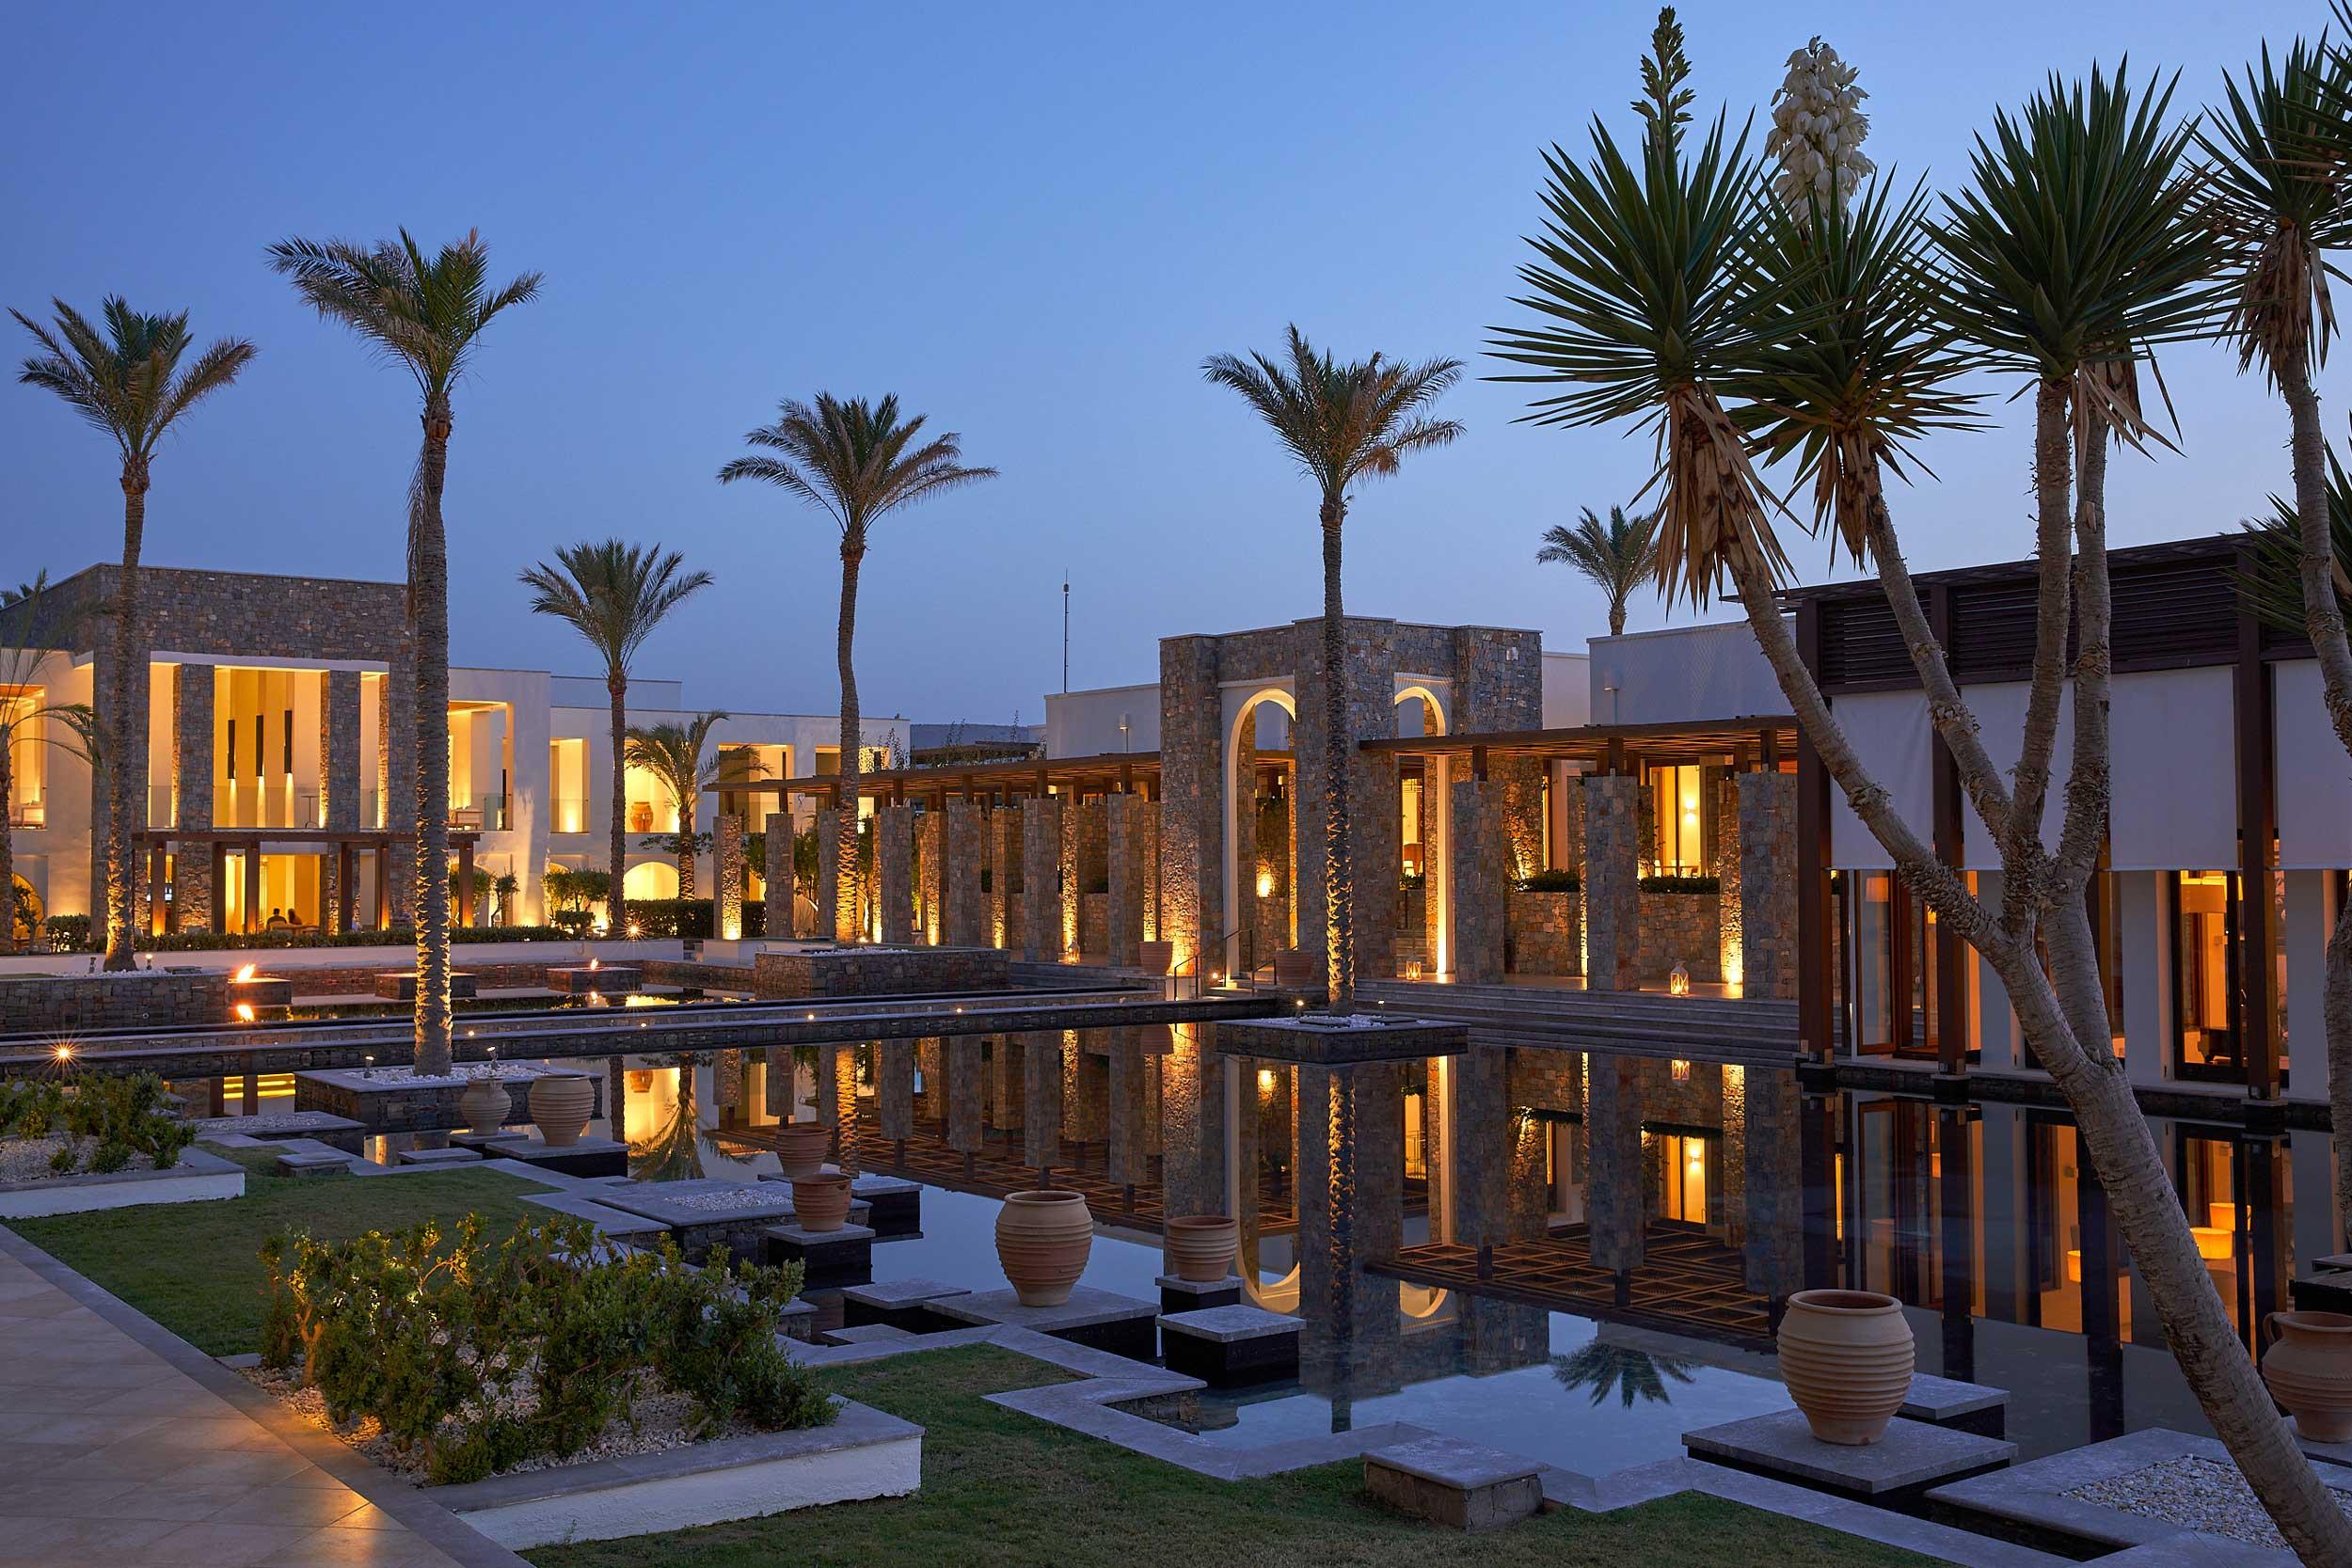 Grecotel Amirandes , central building with lagoon , night shot